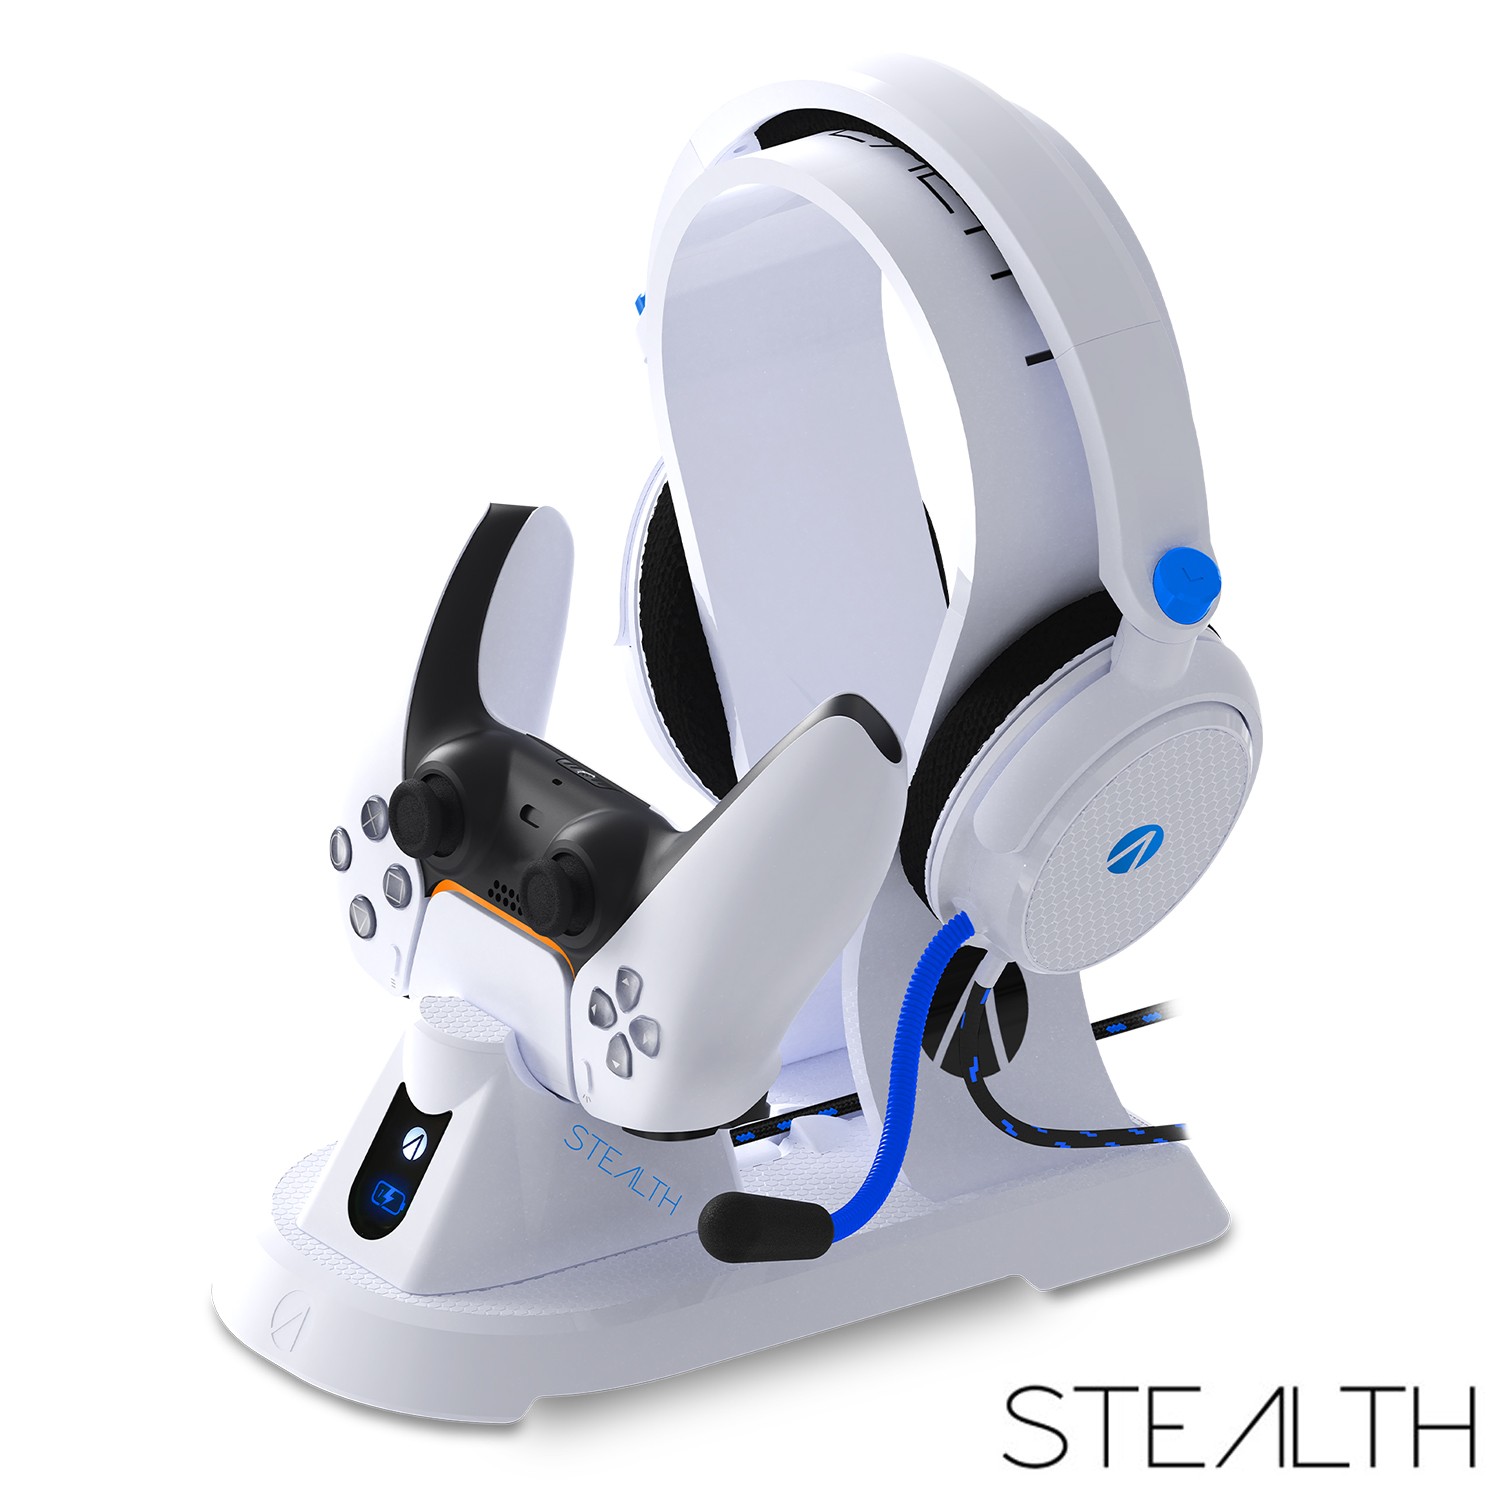 Station ultime gaming blanche pour PS5 Stealth SX-C160V, Chargeur +  Batterie + Casque Premium + Support